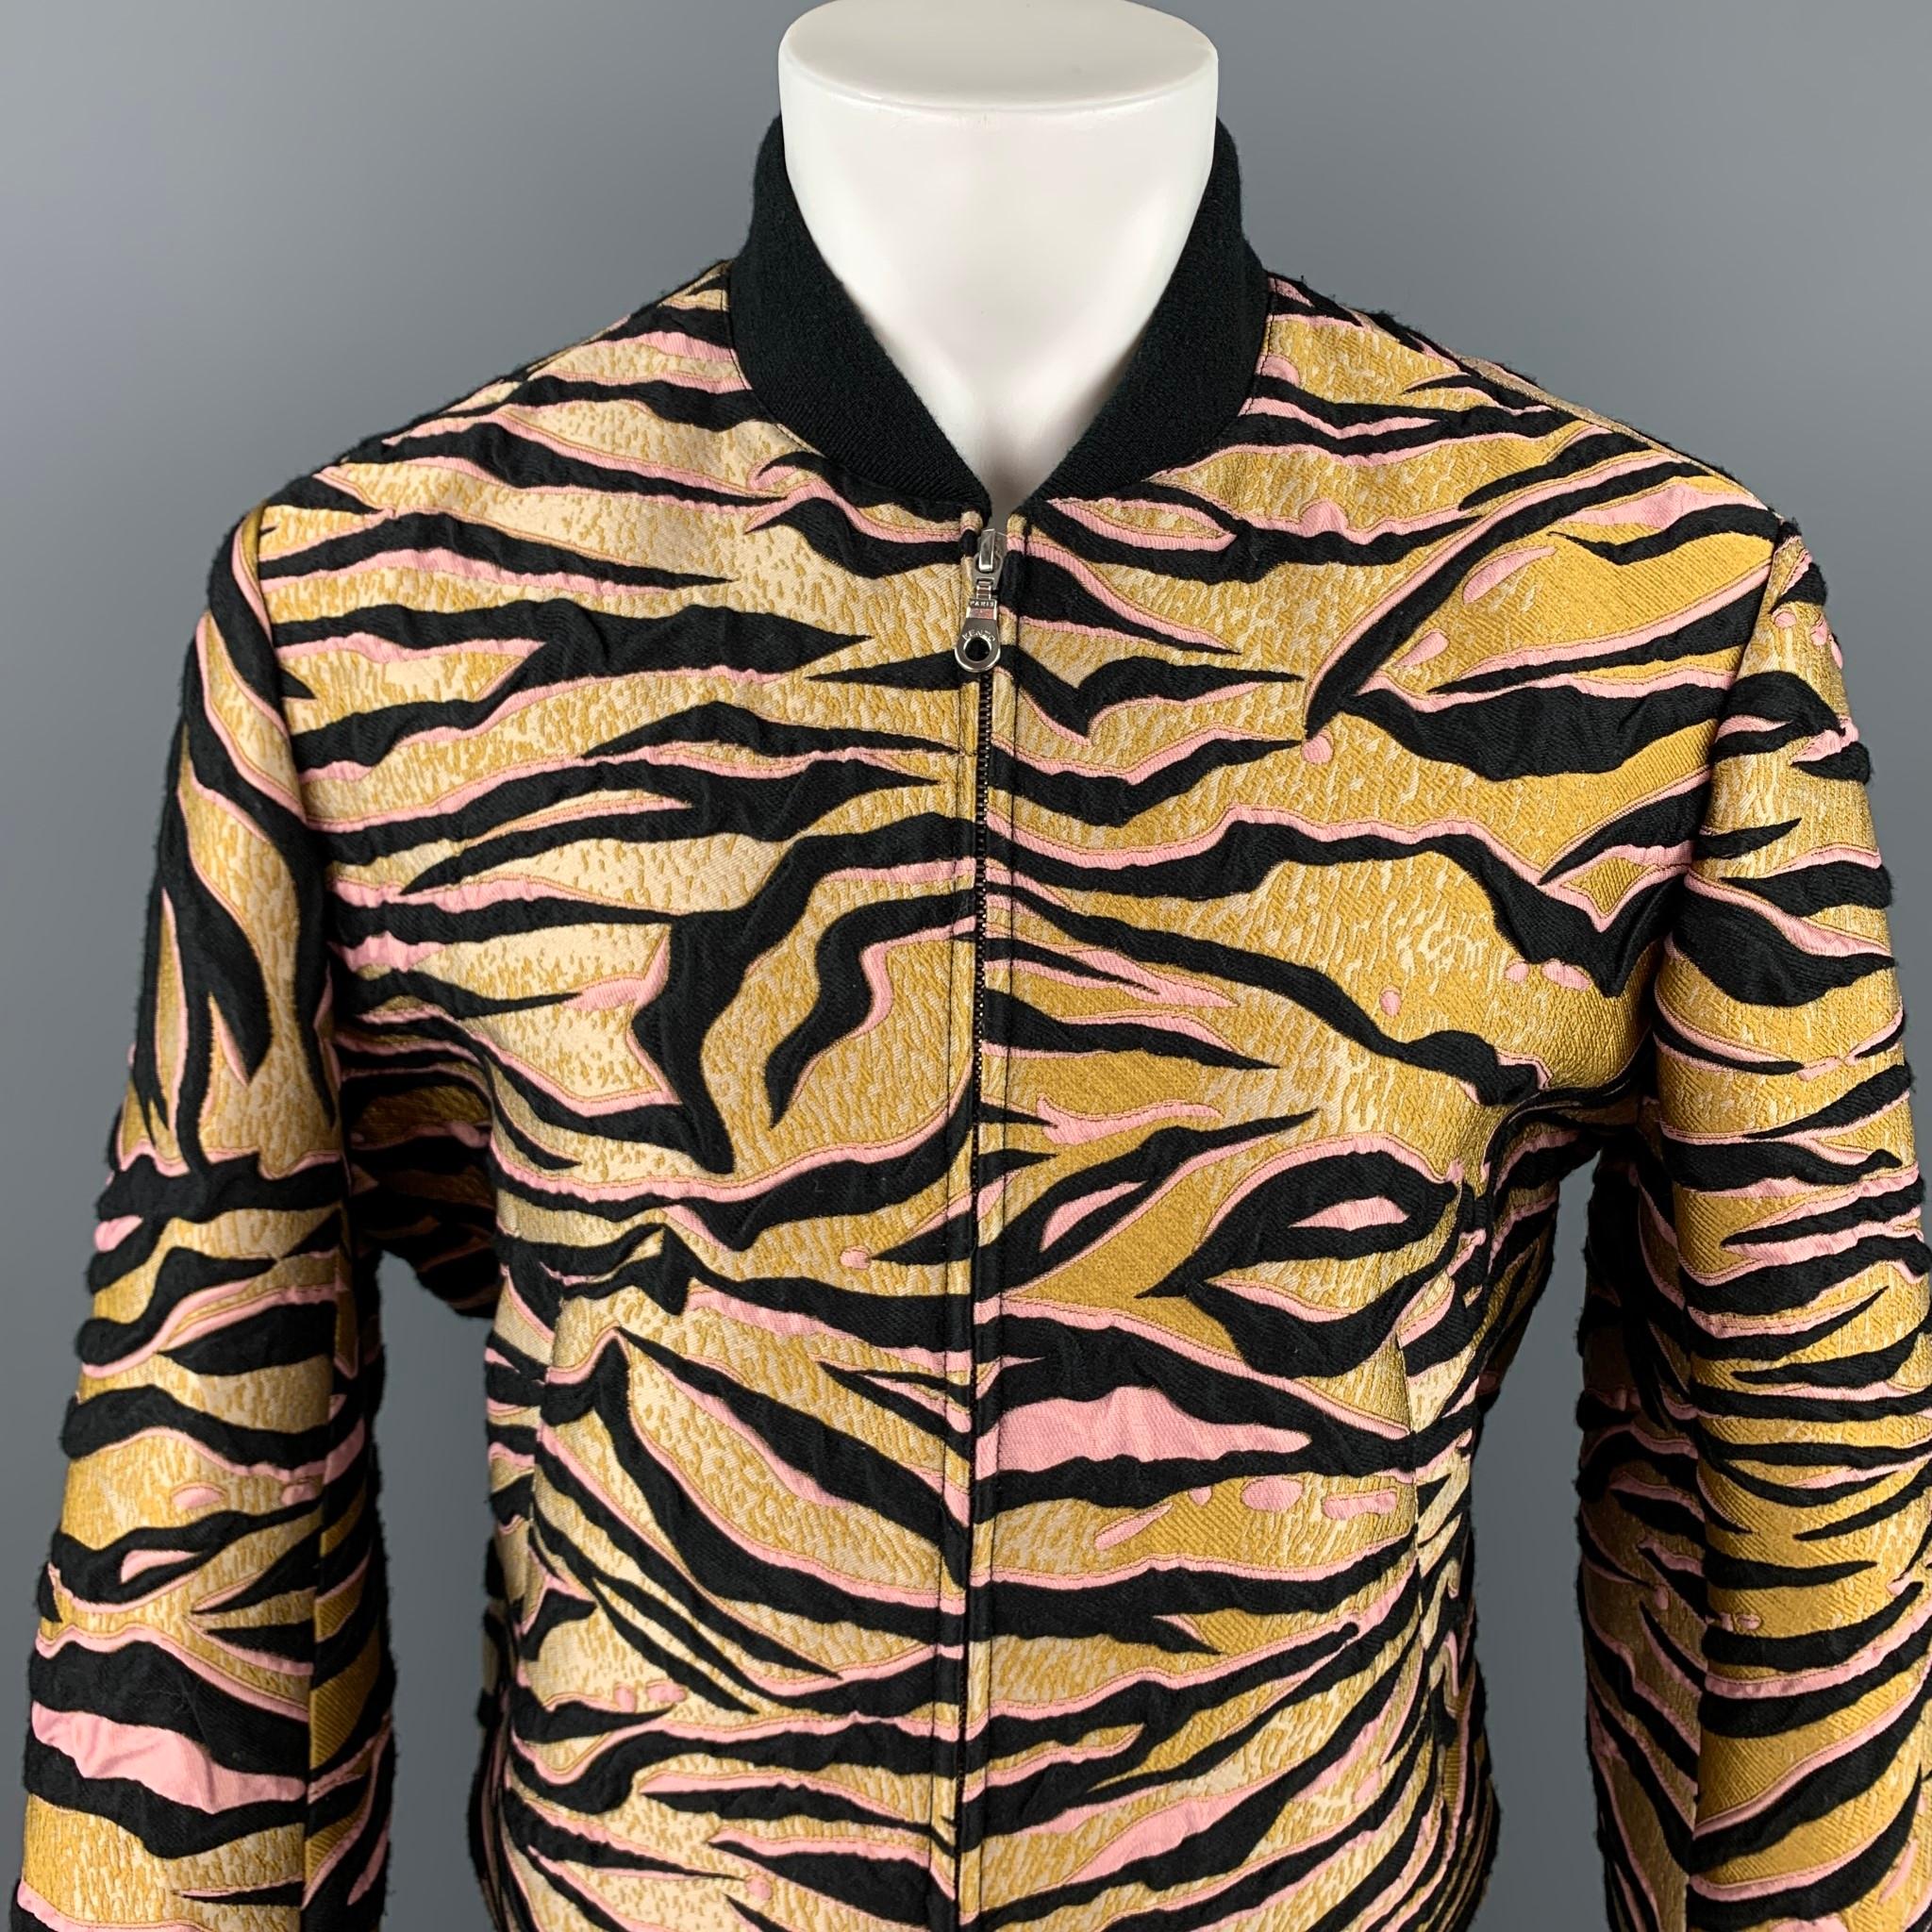 KENZO jacket comes in a gold & black jacquard polyester blend with a full liner featuring a bomber style, ribbed hem, slit pockets, and a zip up closure.

Very Good Pre-Owned Condition.
Marked: L

Measurements:

Shoulder: 18.5 in.
Chest: 46